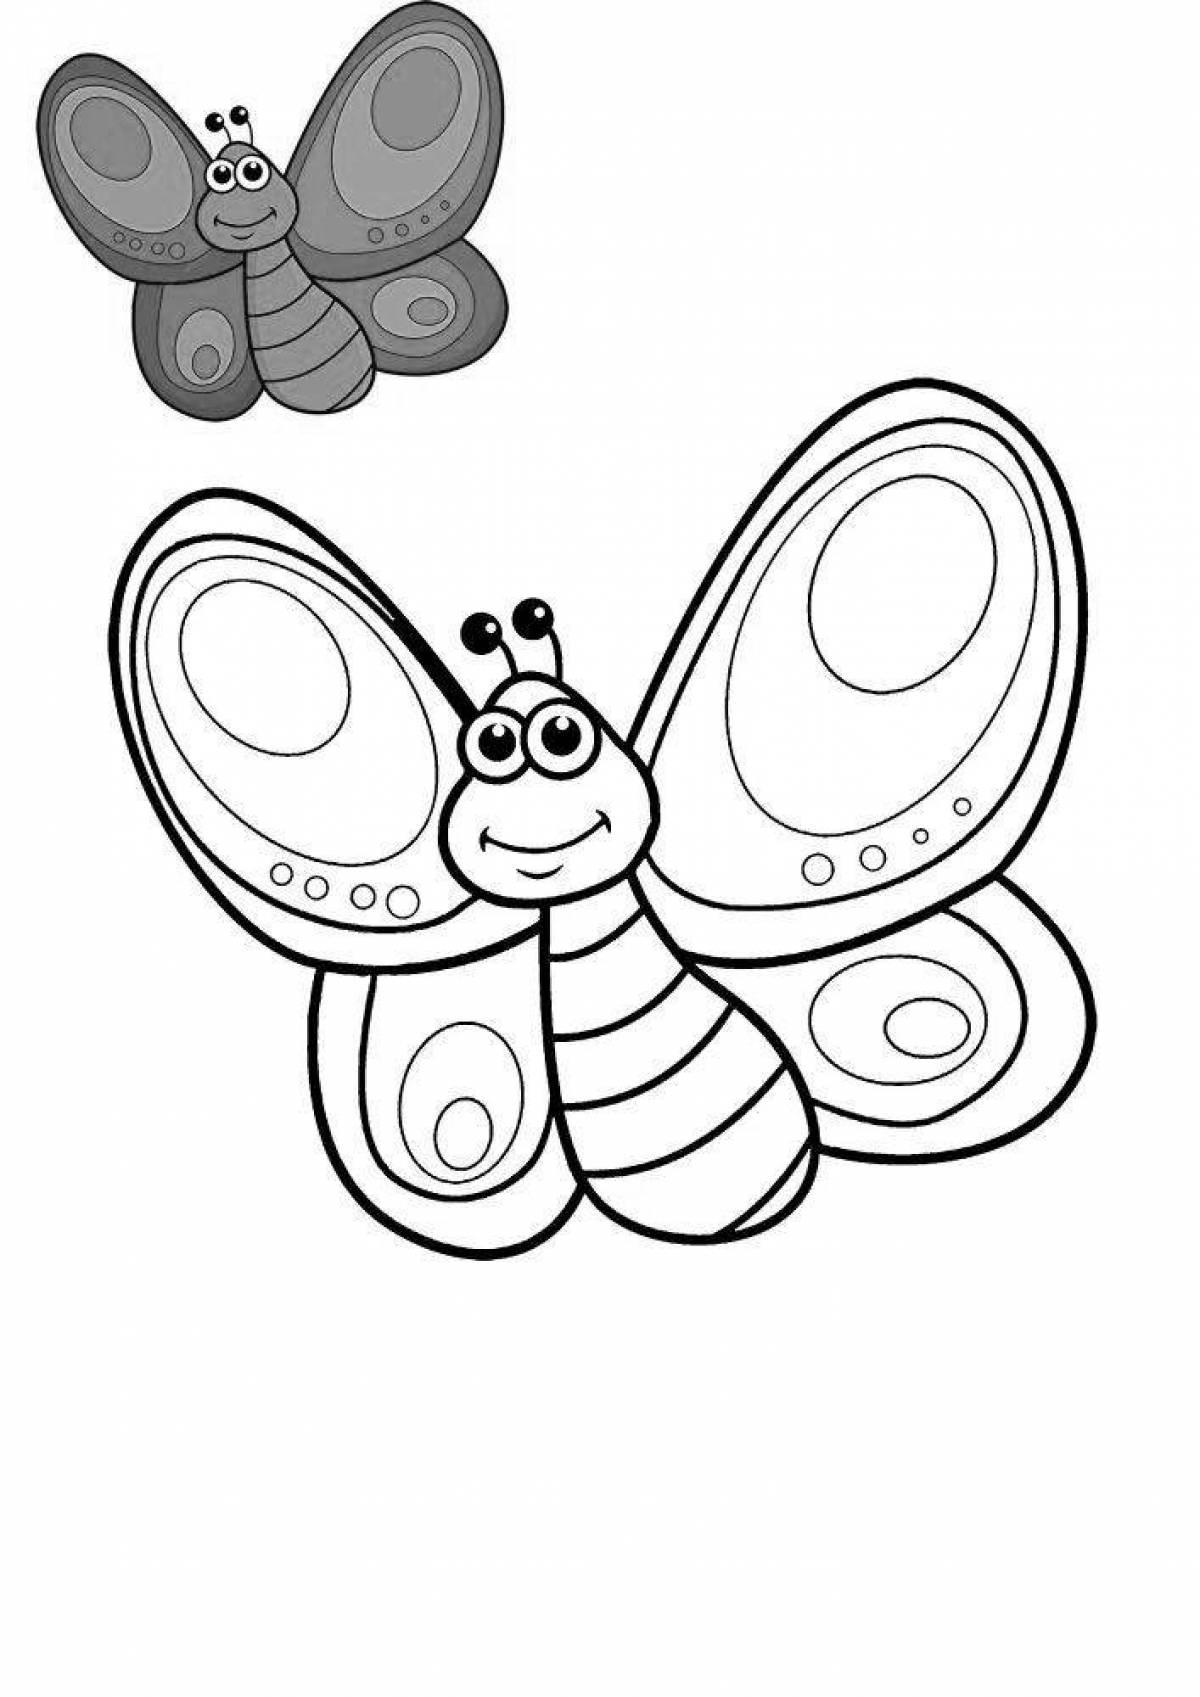 Funny butterfly coloring book for kids 5-6 years old